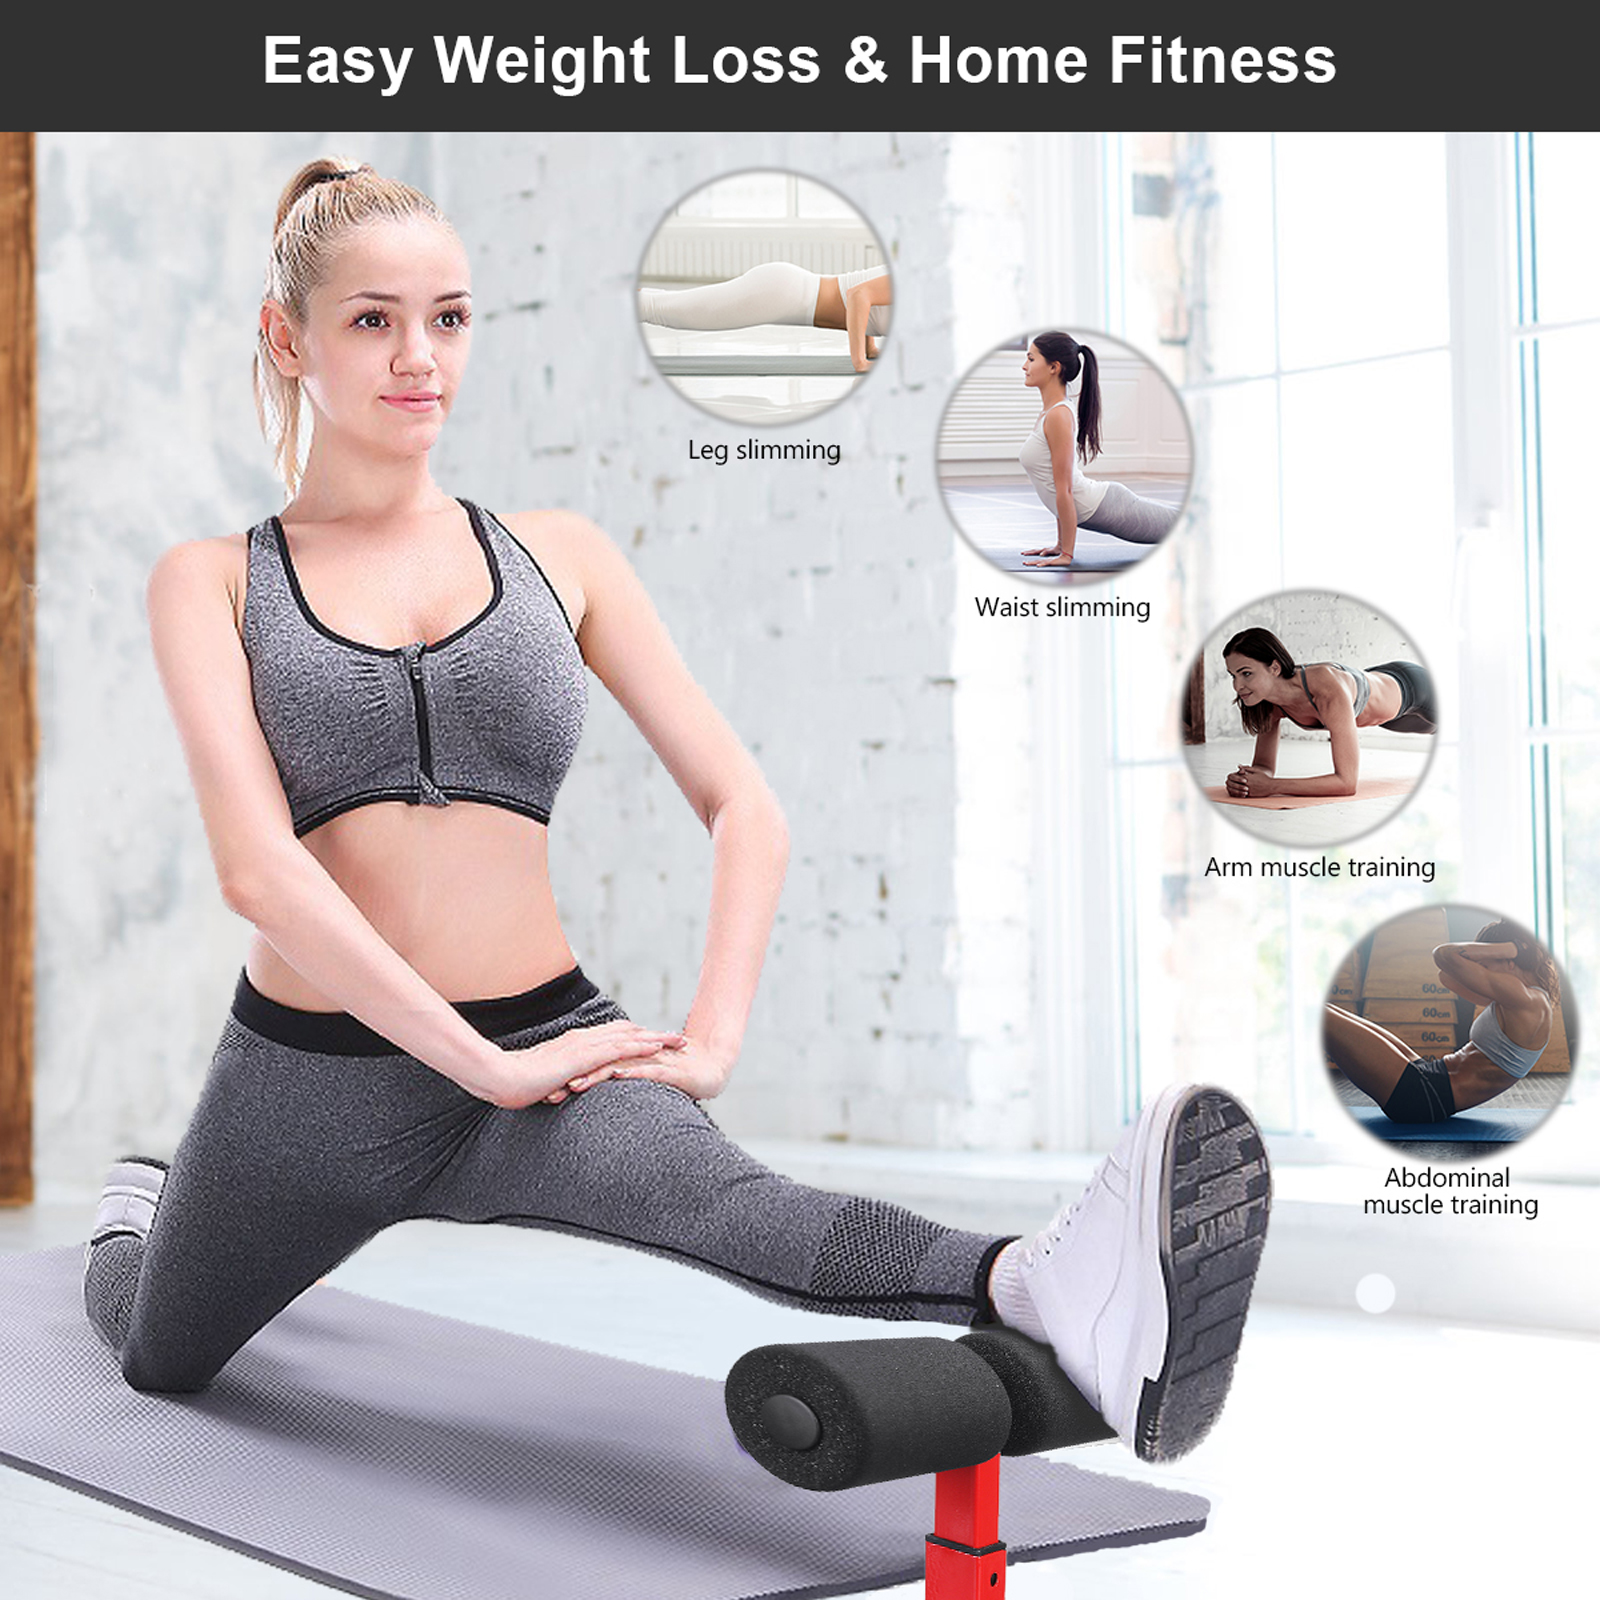 Suction-Sit-Up-Stand-Bars-Portable-Core-Strength-Muscle-Training-Safety-Body-Building-Fitness-Equipm-1810083-5